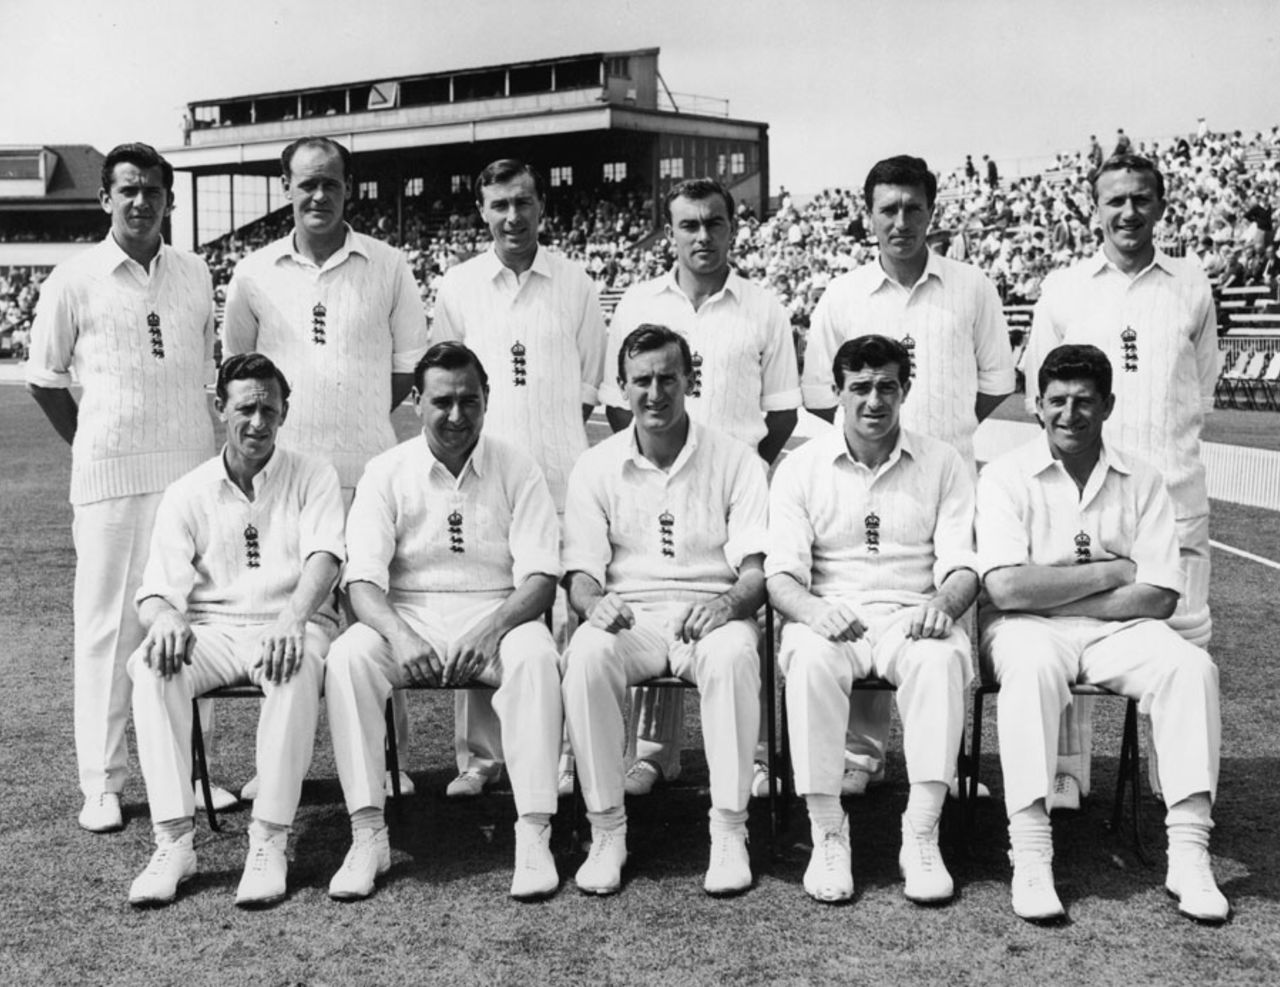 The England XI for the first Test at Old Trafford. Back row, left to right: David Allen, Brian Close, Keith Andrew, John Edrich, Fred Titmus and Mickey Stewart. Front row, left to right: Brian Statham, Colin Cowdrey, Ted Dexter, Fred Trueman and Ken Barrington, England v West Indies, Old Trafford, 4th day, June 10, 1963